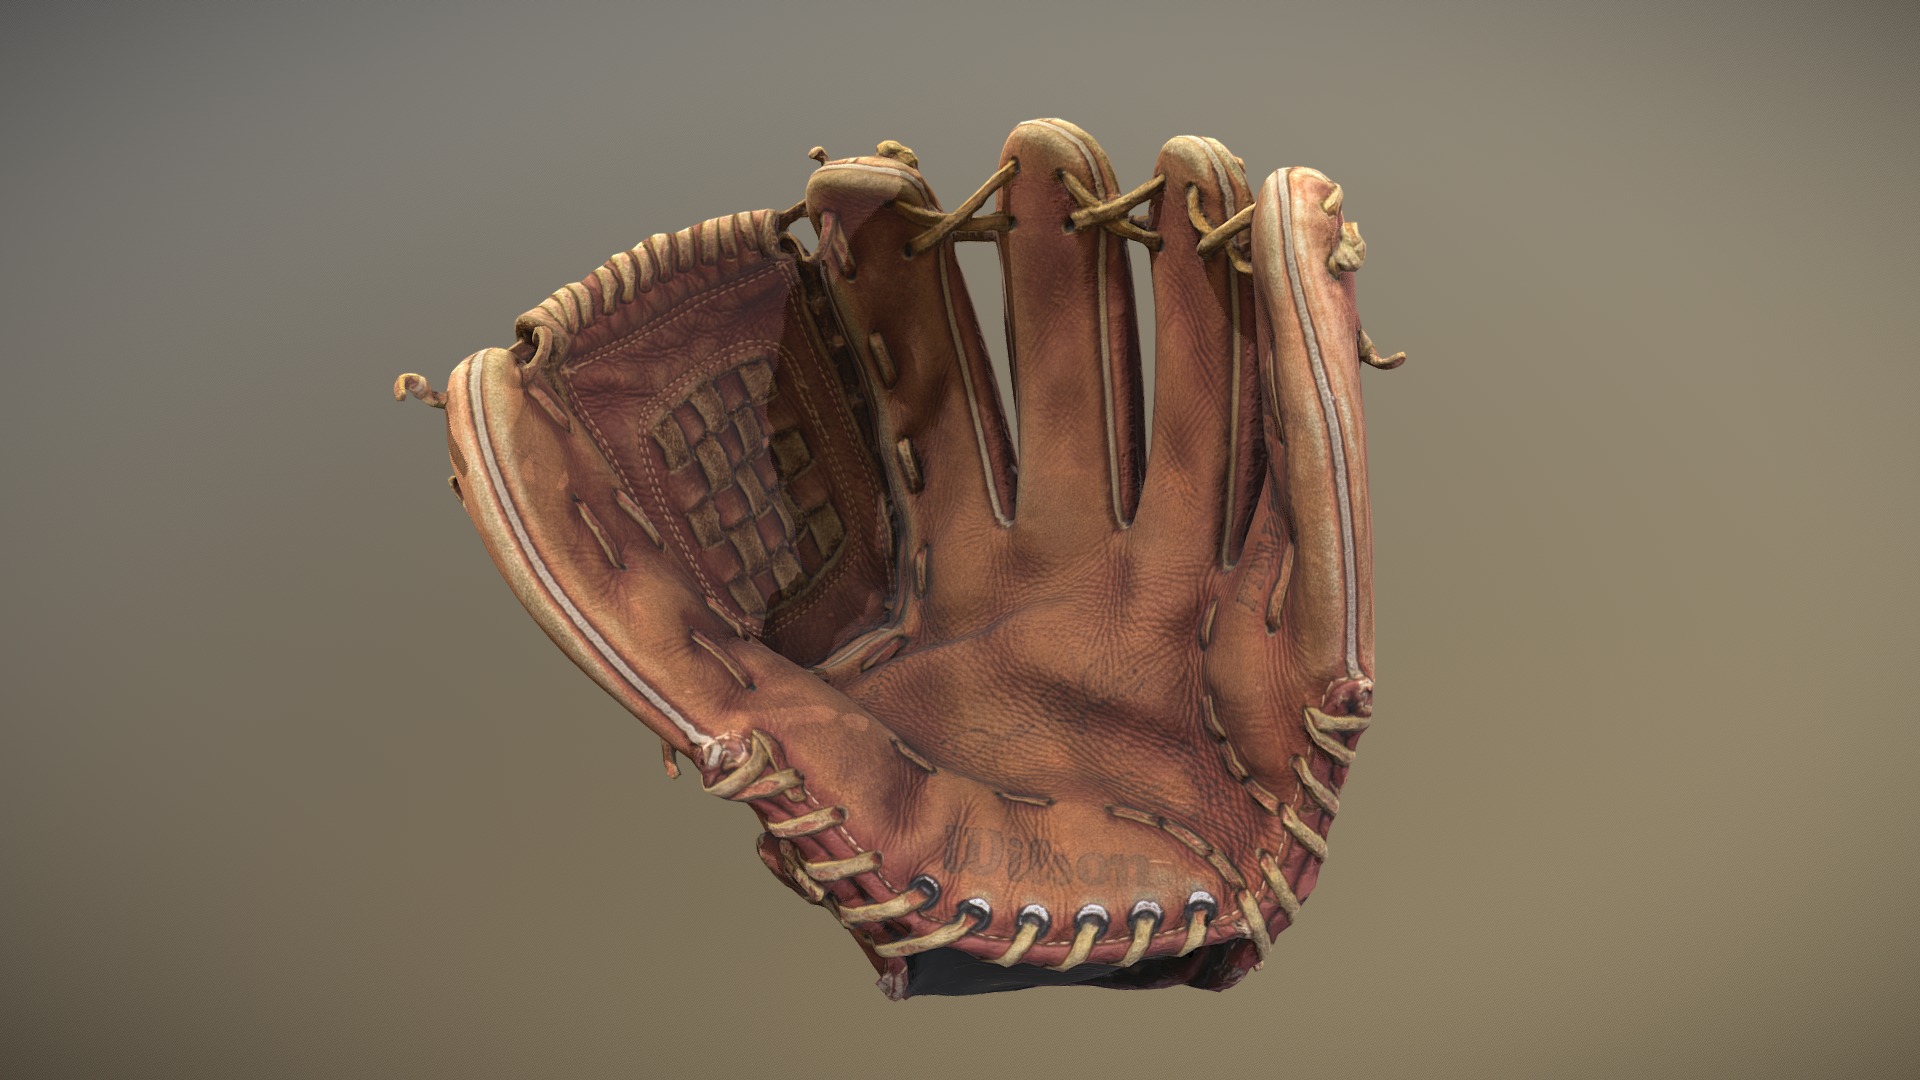 3D model Dave Righetti Signature Wilson Infielder’s Glove - This is a 3D model of the Dave Righetti Signature Wilson Infielder's Glove. The 3D model is about a gloved hand with a brown glove.